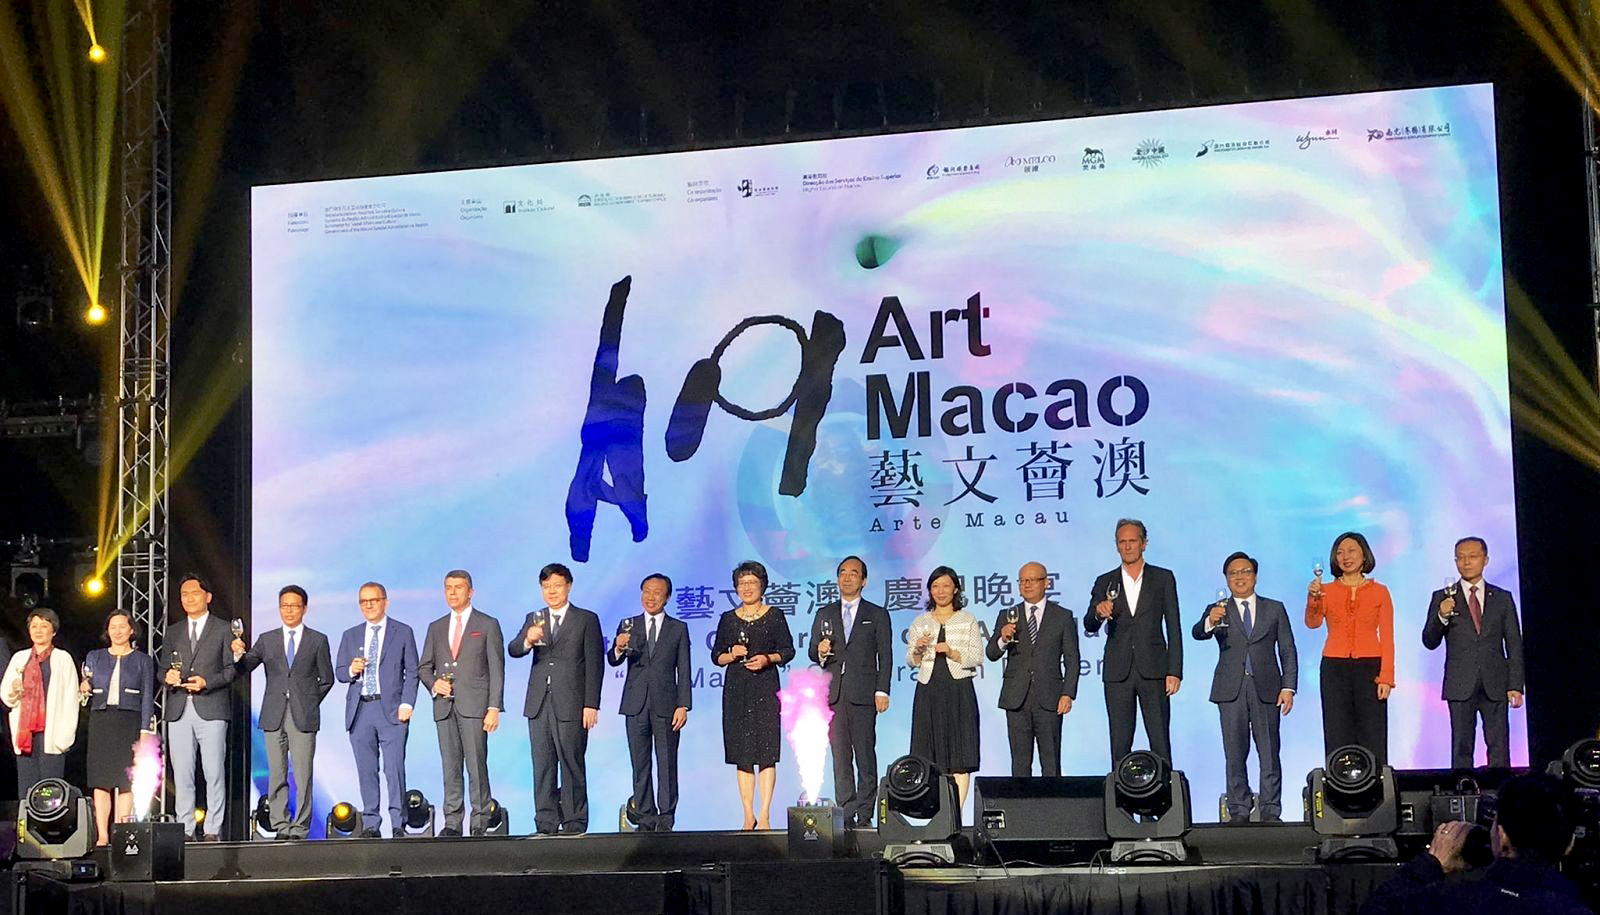 Tam says Art Macao shows draws over 16 million visits